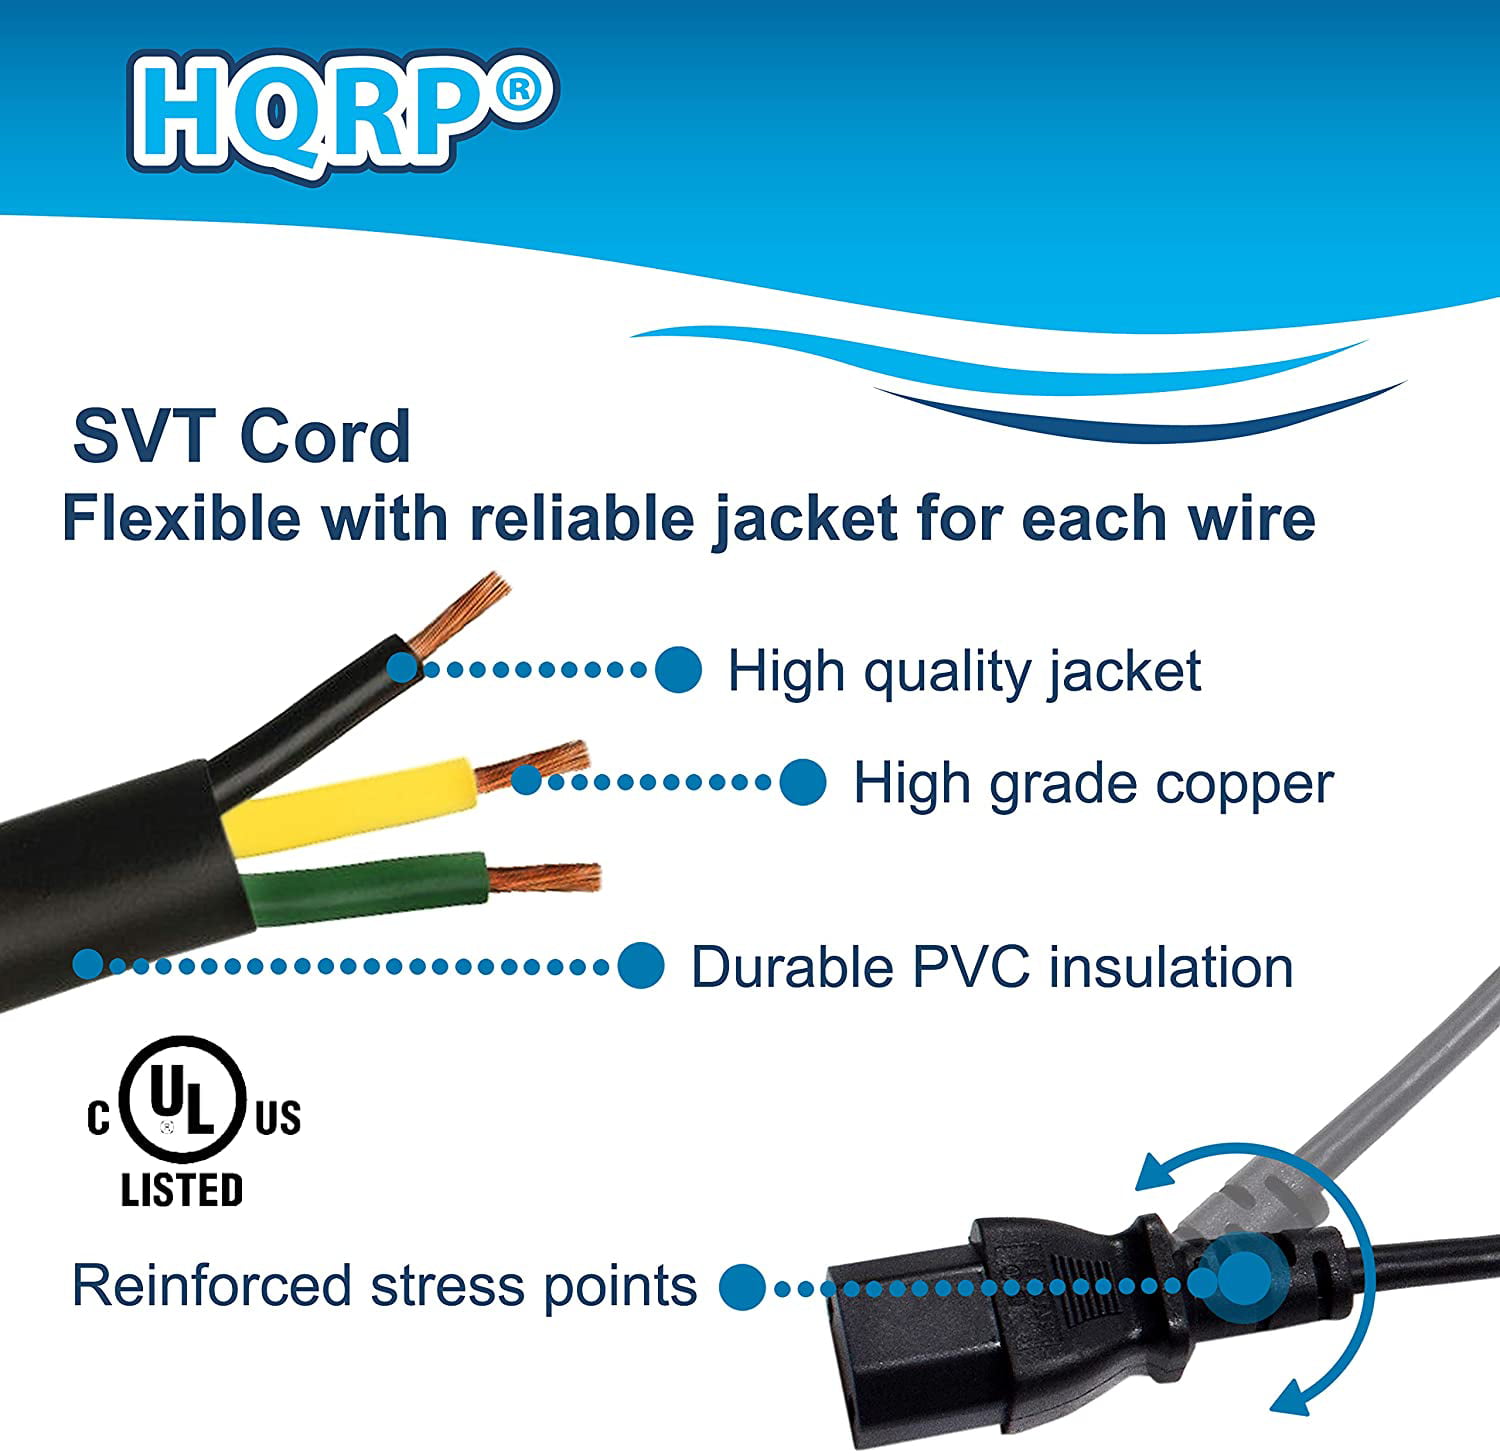 SK-32H570D VR-4085DF SK-32H590D TX-42F430S SK-26H735S SK-32H640G 6FT AC Power Cord Cable for Westinghouse LCD TV Television Monitor SK-26H730S SK-32H540S VR-5585DFZ TX-42F810G 